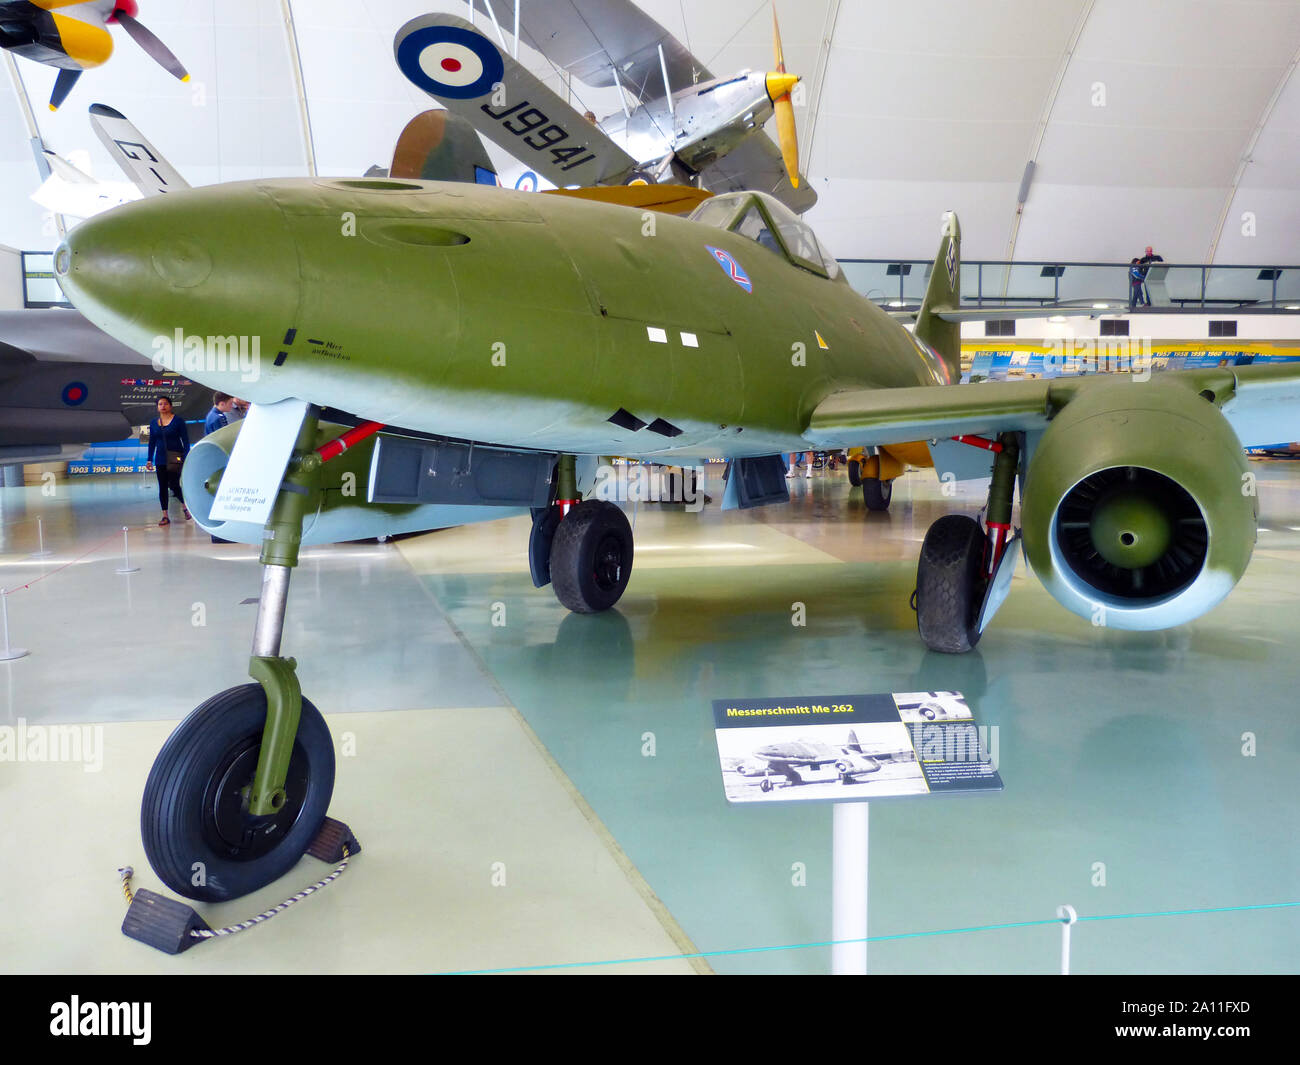 Royal Air Force (RAF) Museum / Hendon, London, UK - June 29, 2014: Real historic aircraft from all over the world on display: Messerschmitt Me 262 Stock Photo